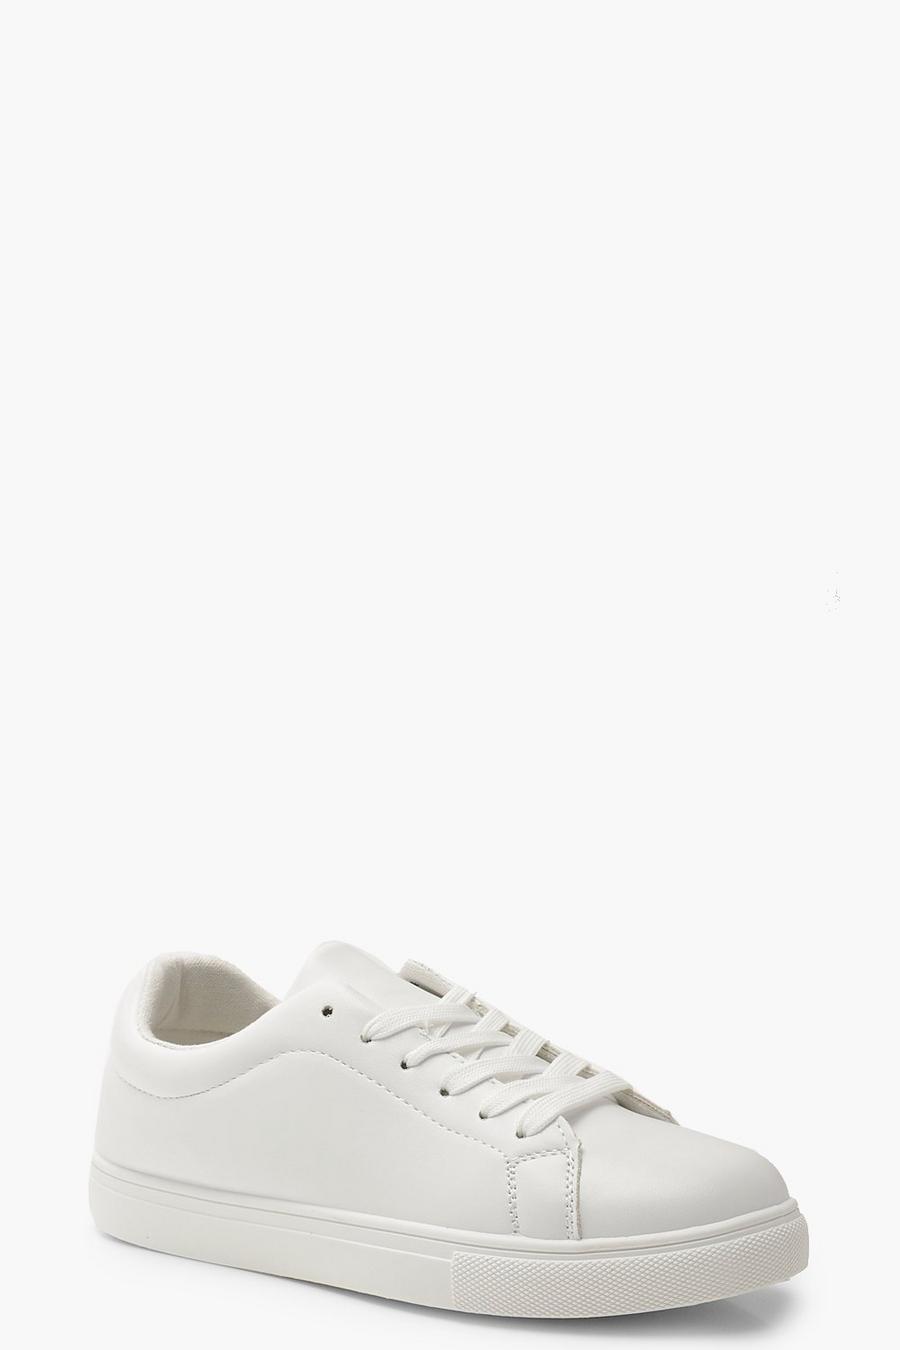 White Lace Up Flat Trainers image number 1